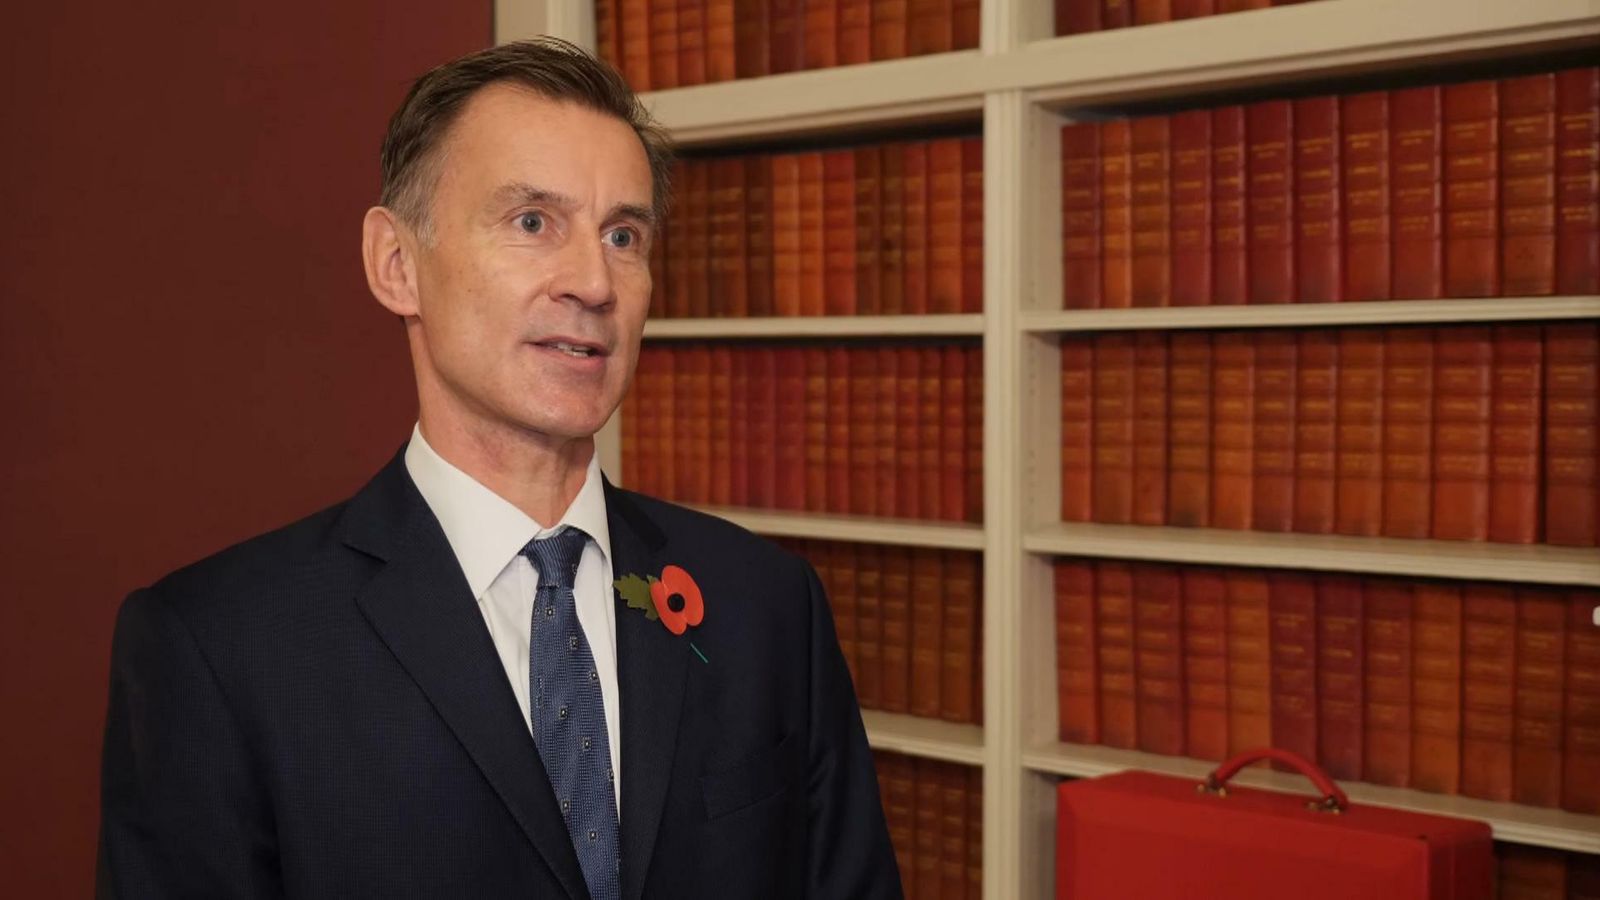 Jeremy Hunt hints he could make it easier for local authorities to increase council tax